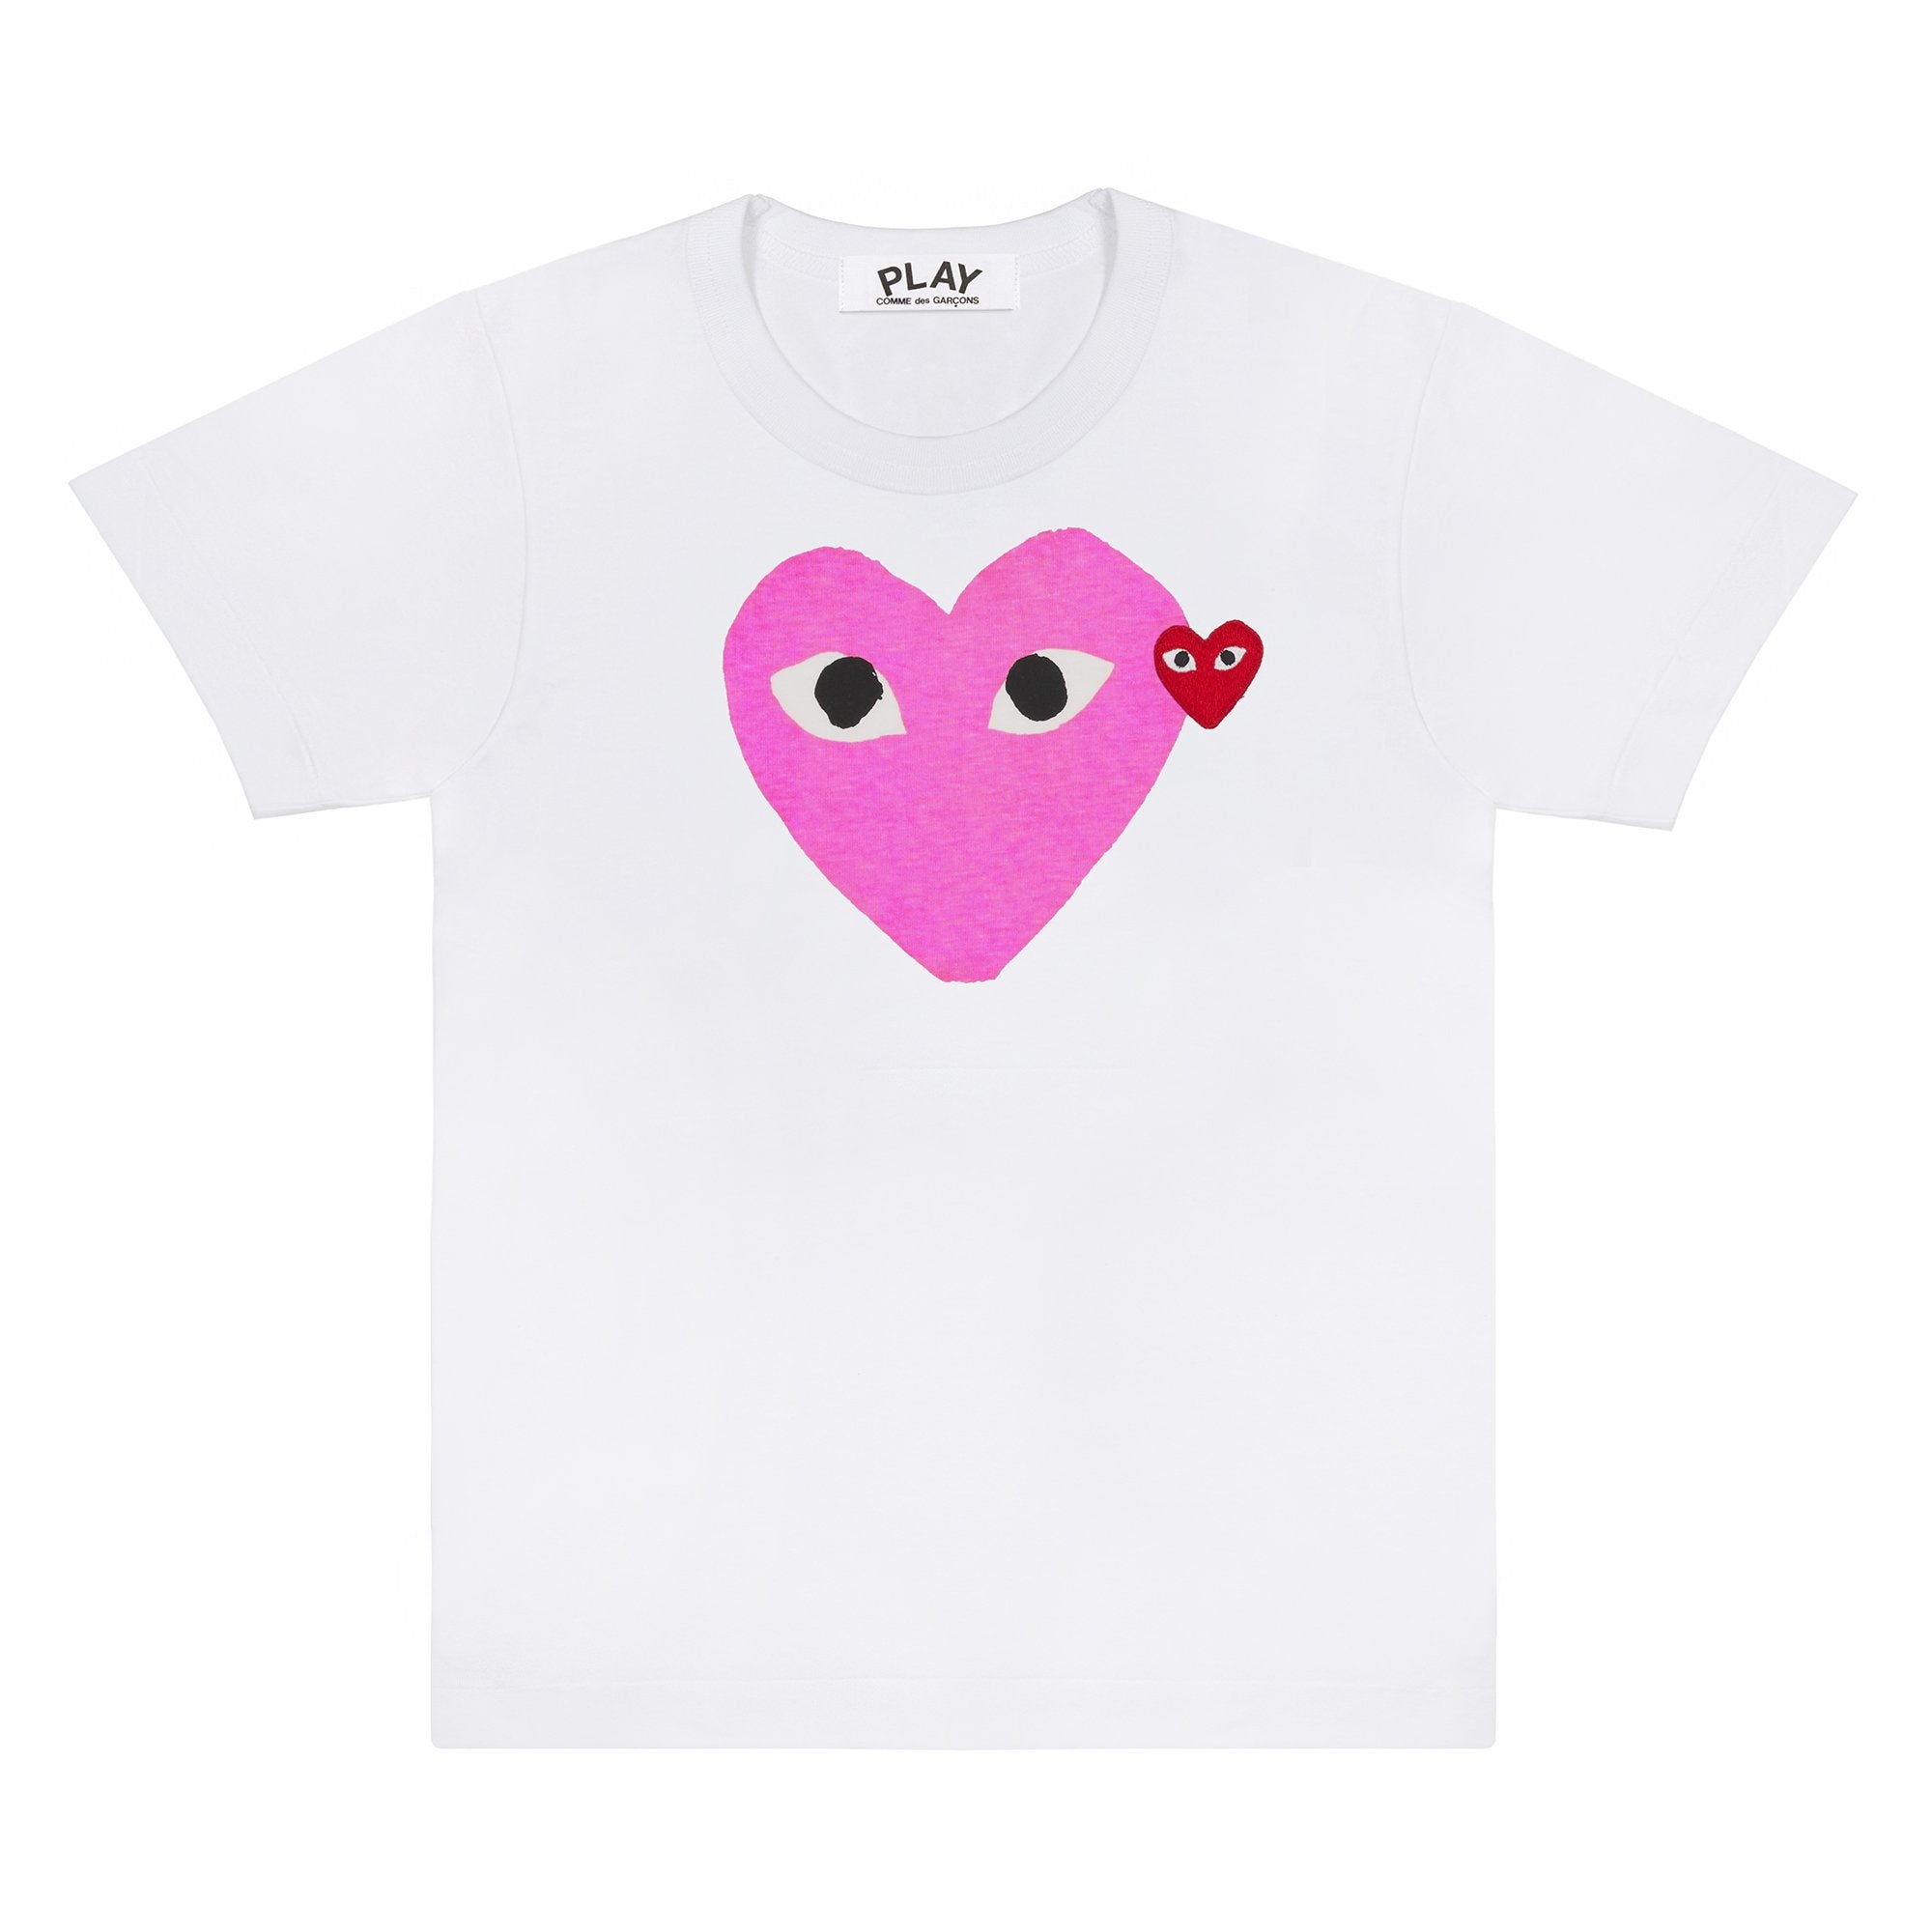 PLAY T-Shirt Pastel Heart and Red Emblem (Pink)